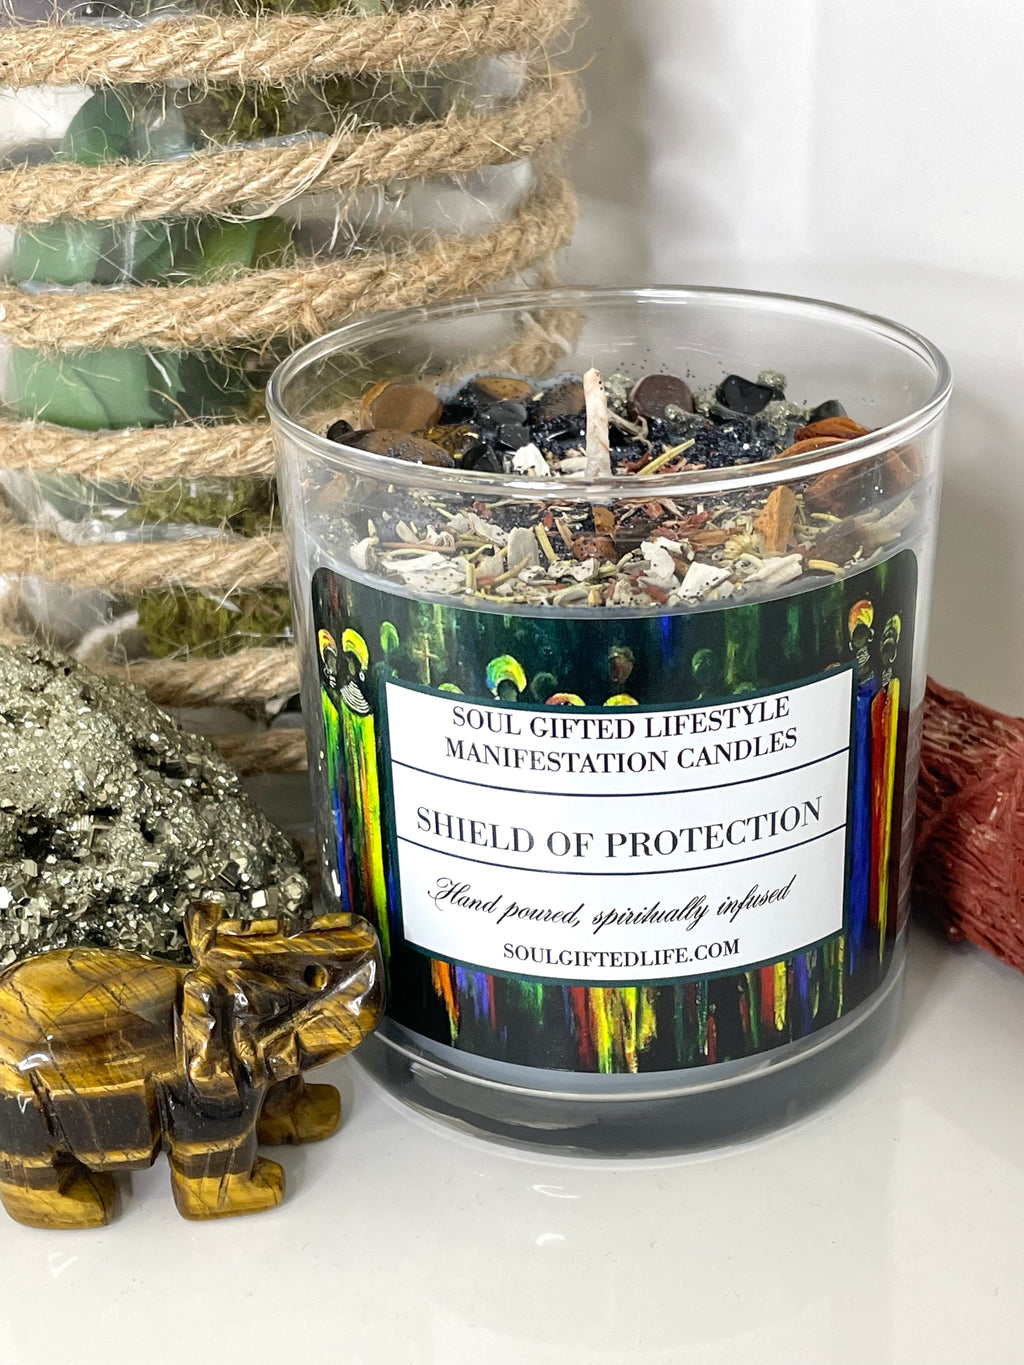 Shield of Protection Manifestation Candle